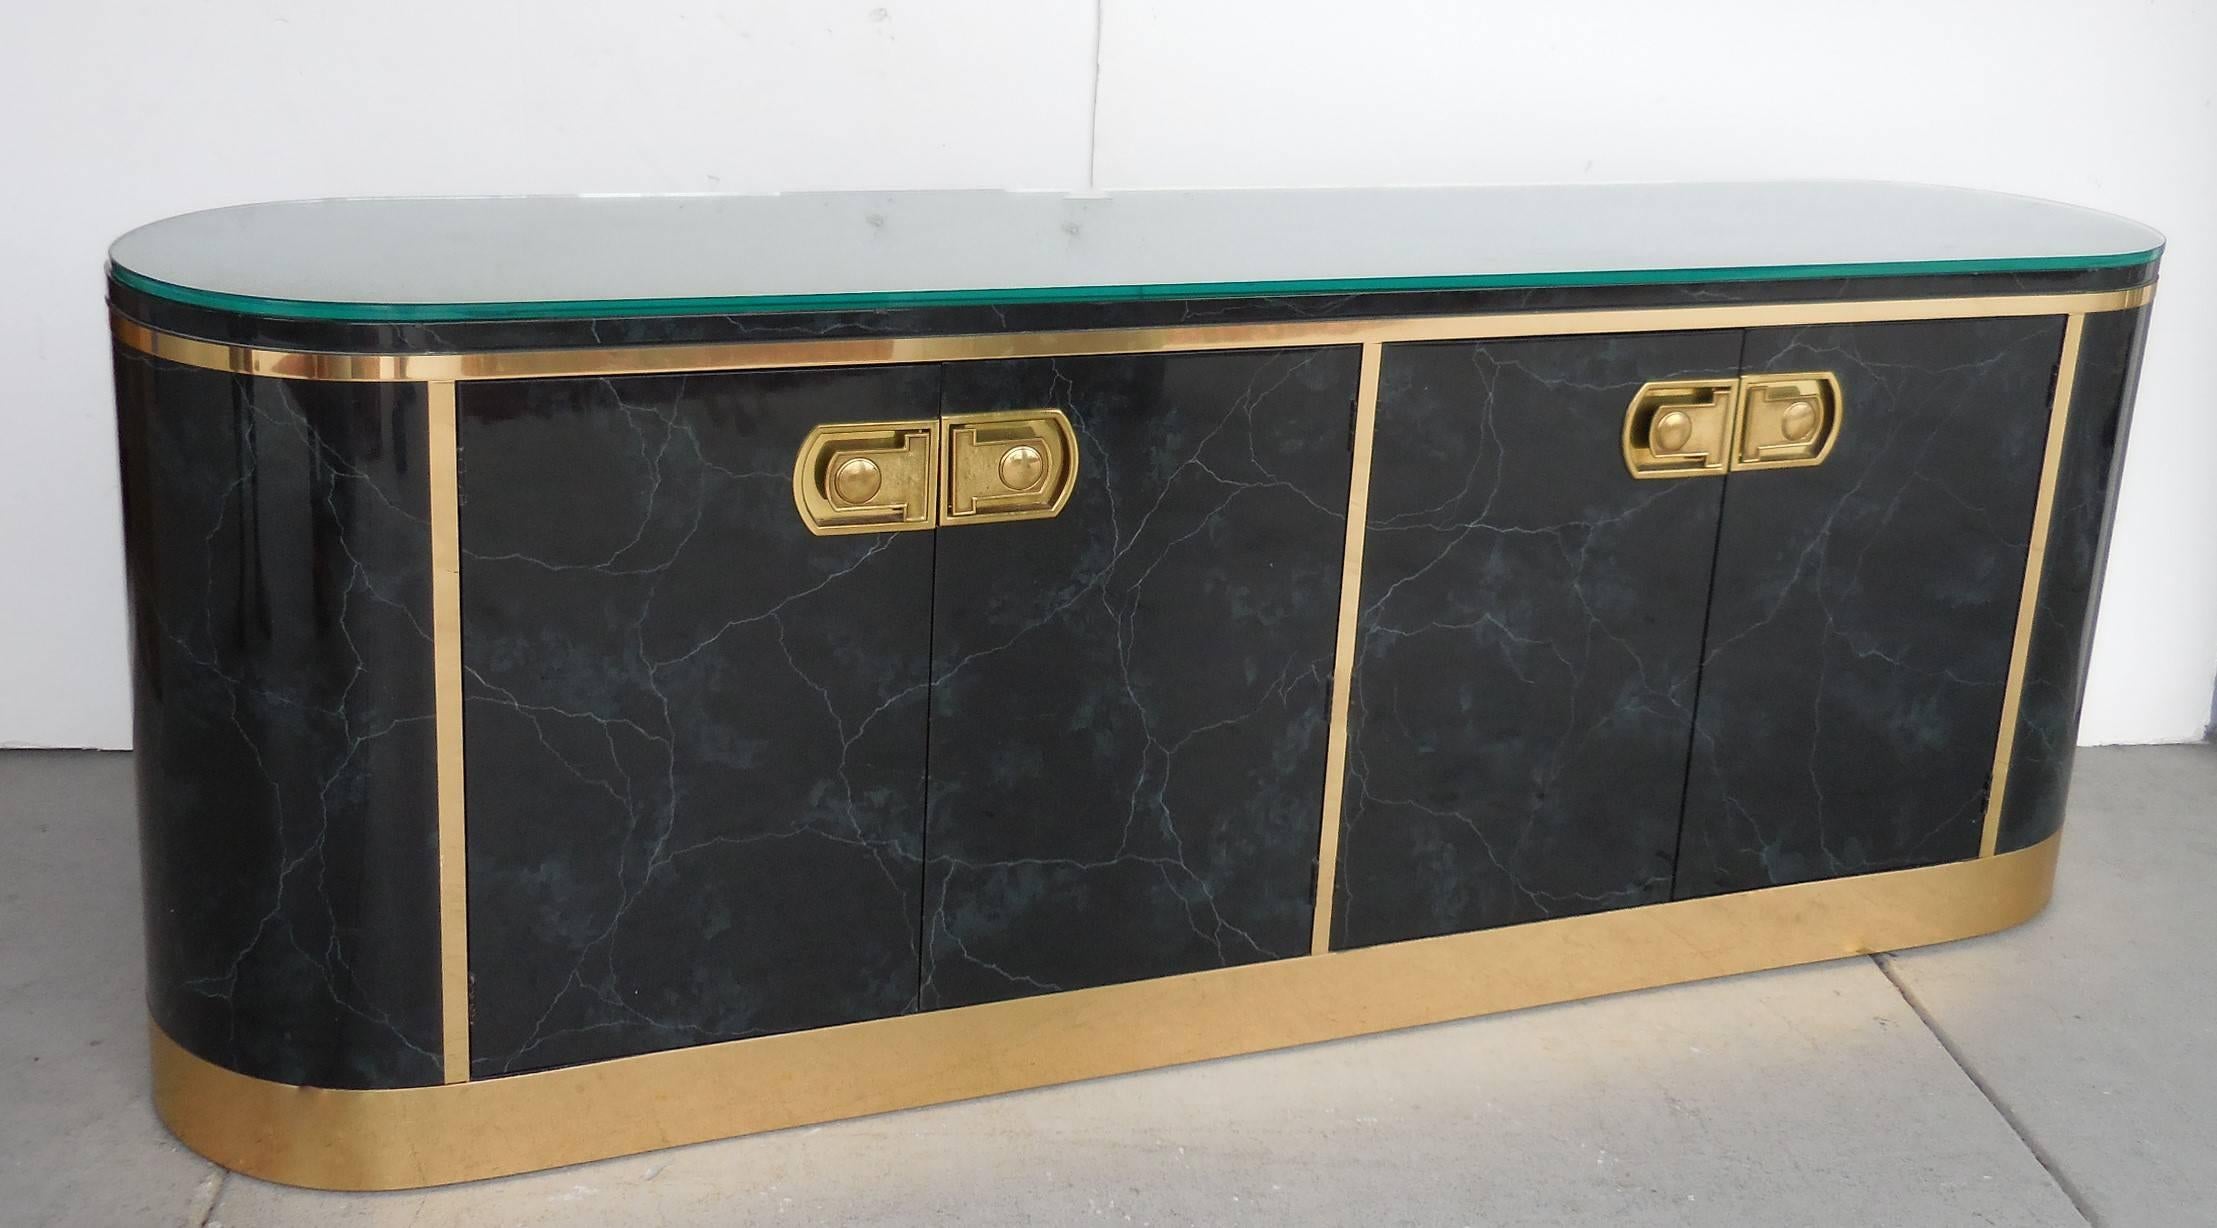 A rare lacquered console with radial ends. Brass pulls and trims. The lacquer is meticulously done to resemble marble, very effective. Includes a half inch thick fitted glass top. Signed on back. This cabinet has four doors that open to reveal four